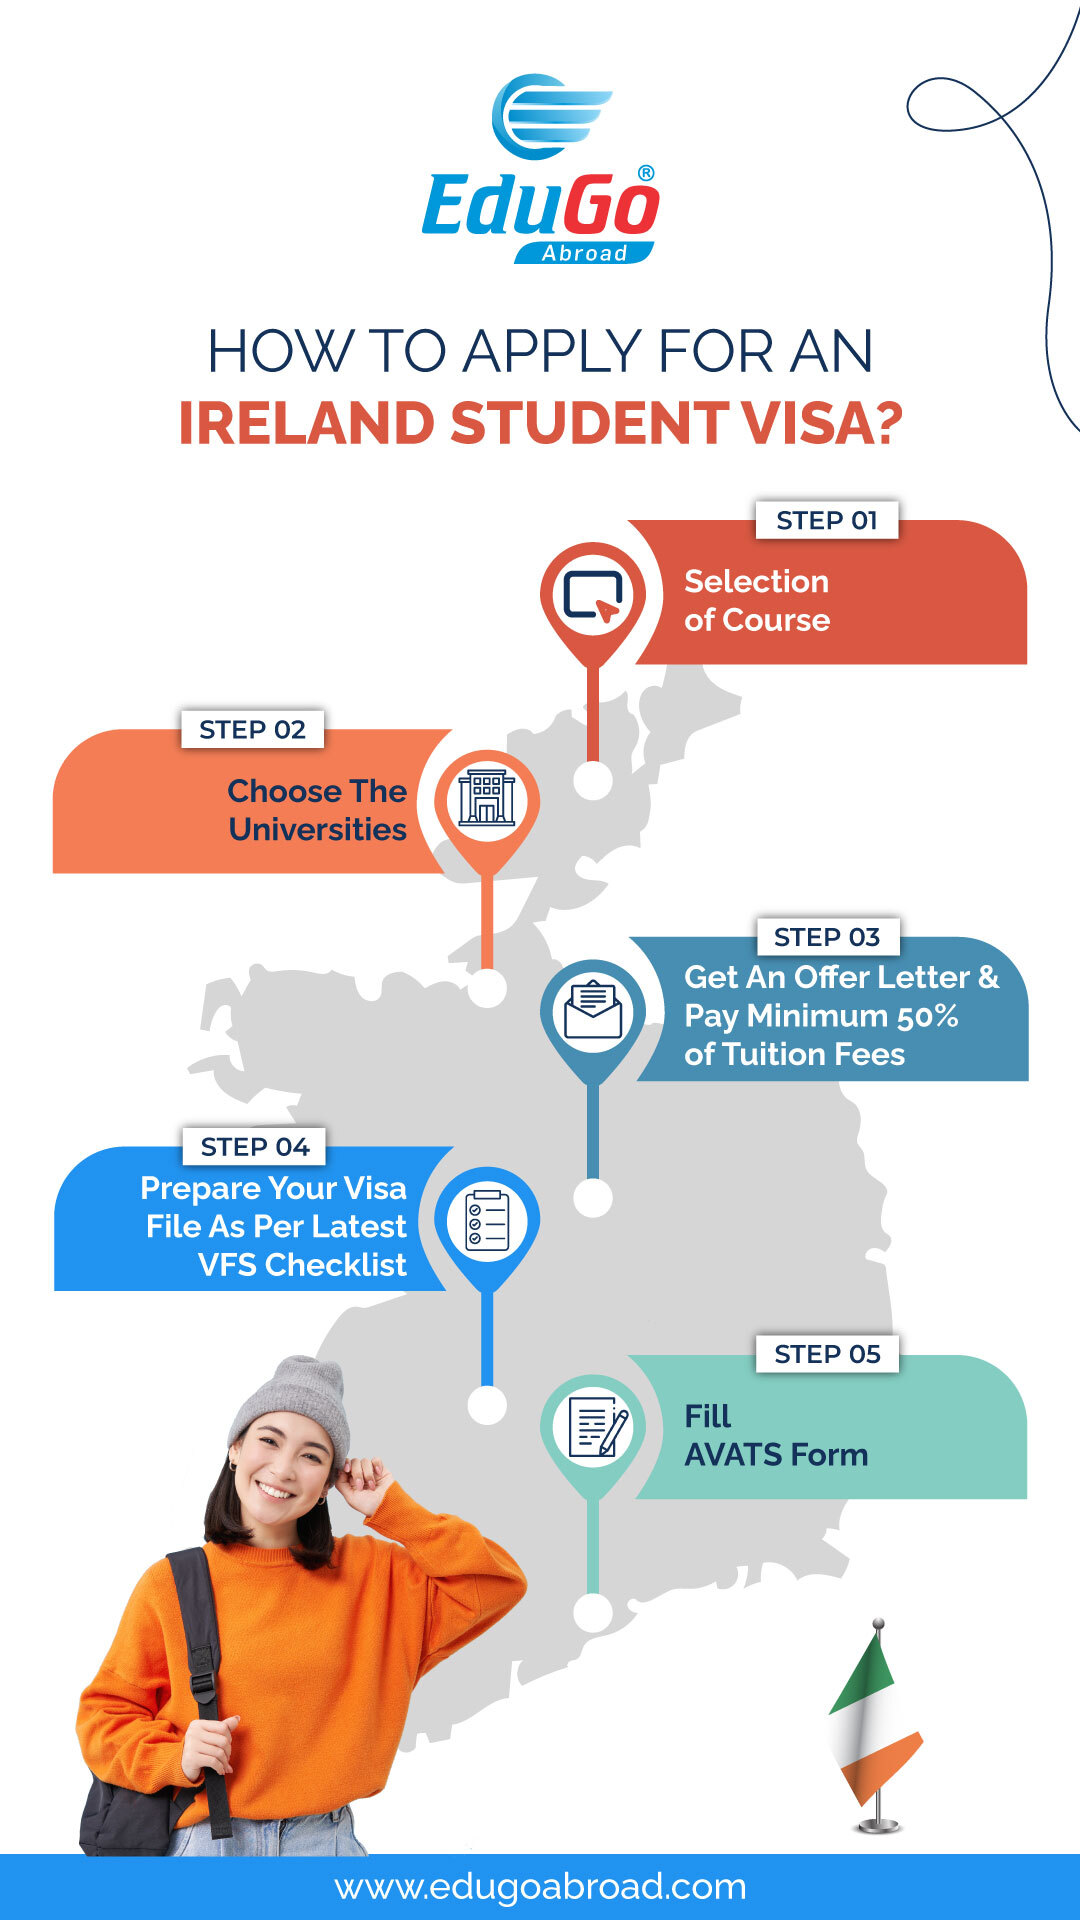 How to Apply for an Ireland Student Visa